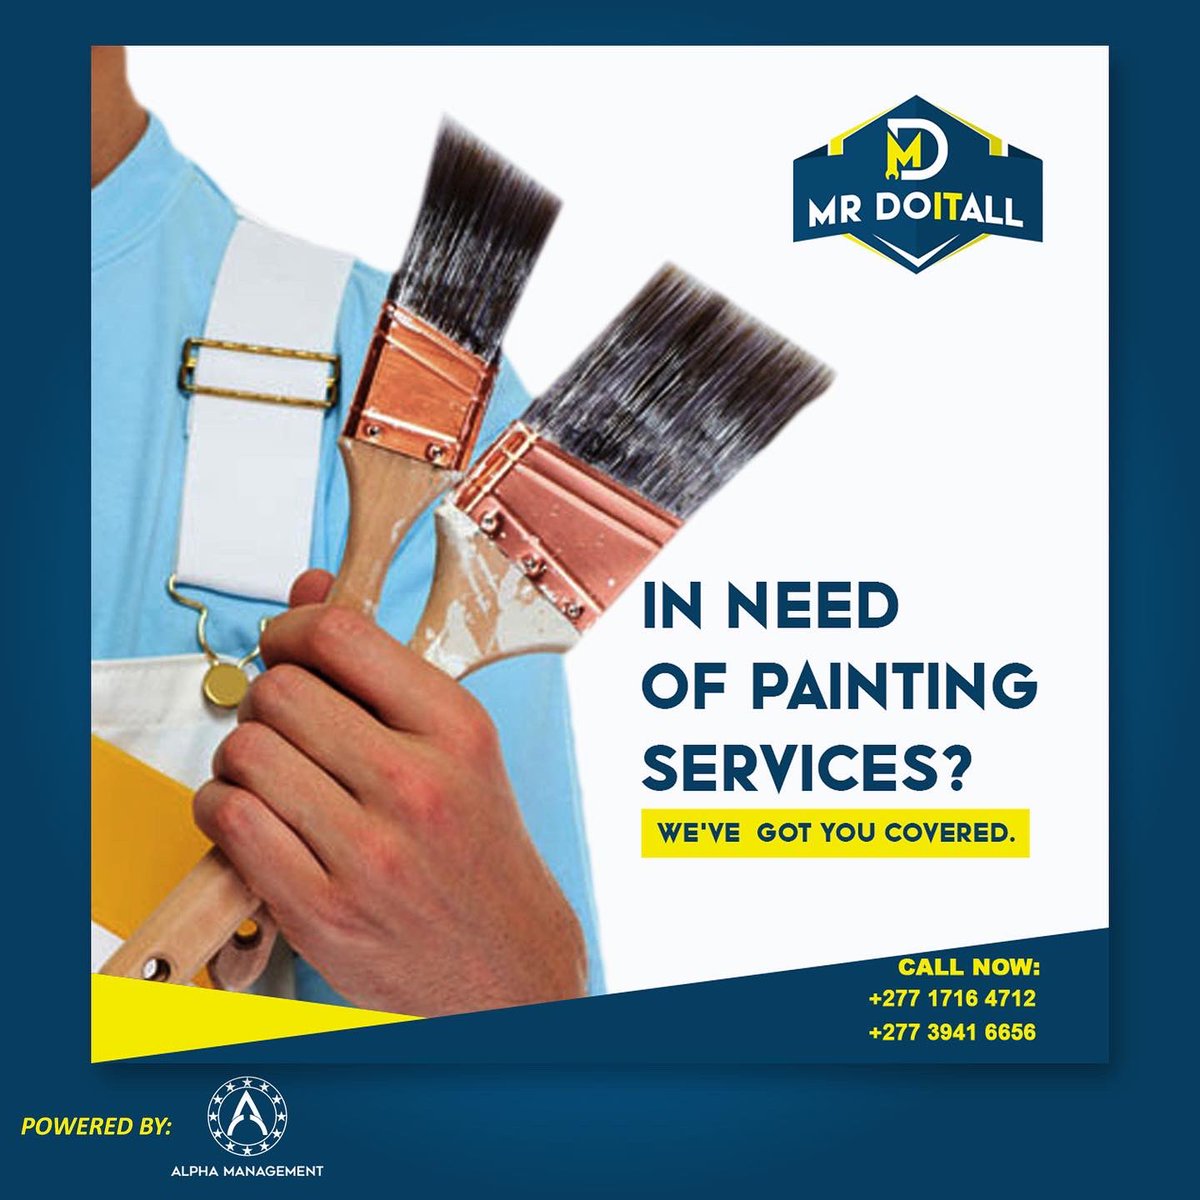 We’ll Take Care Of All Of Your Property Maintenance And Building Maintenance Needs. For All Your Property Maintenance & Property Management Requirements.

Affordable, reliable handymen on standby all over Cape Town. 
:
#mrdoitall
#alphamanagement